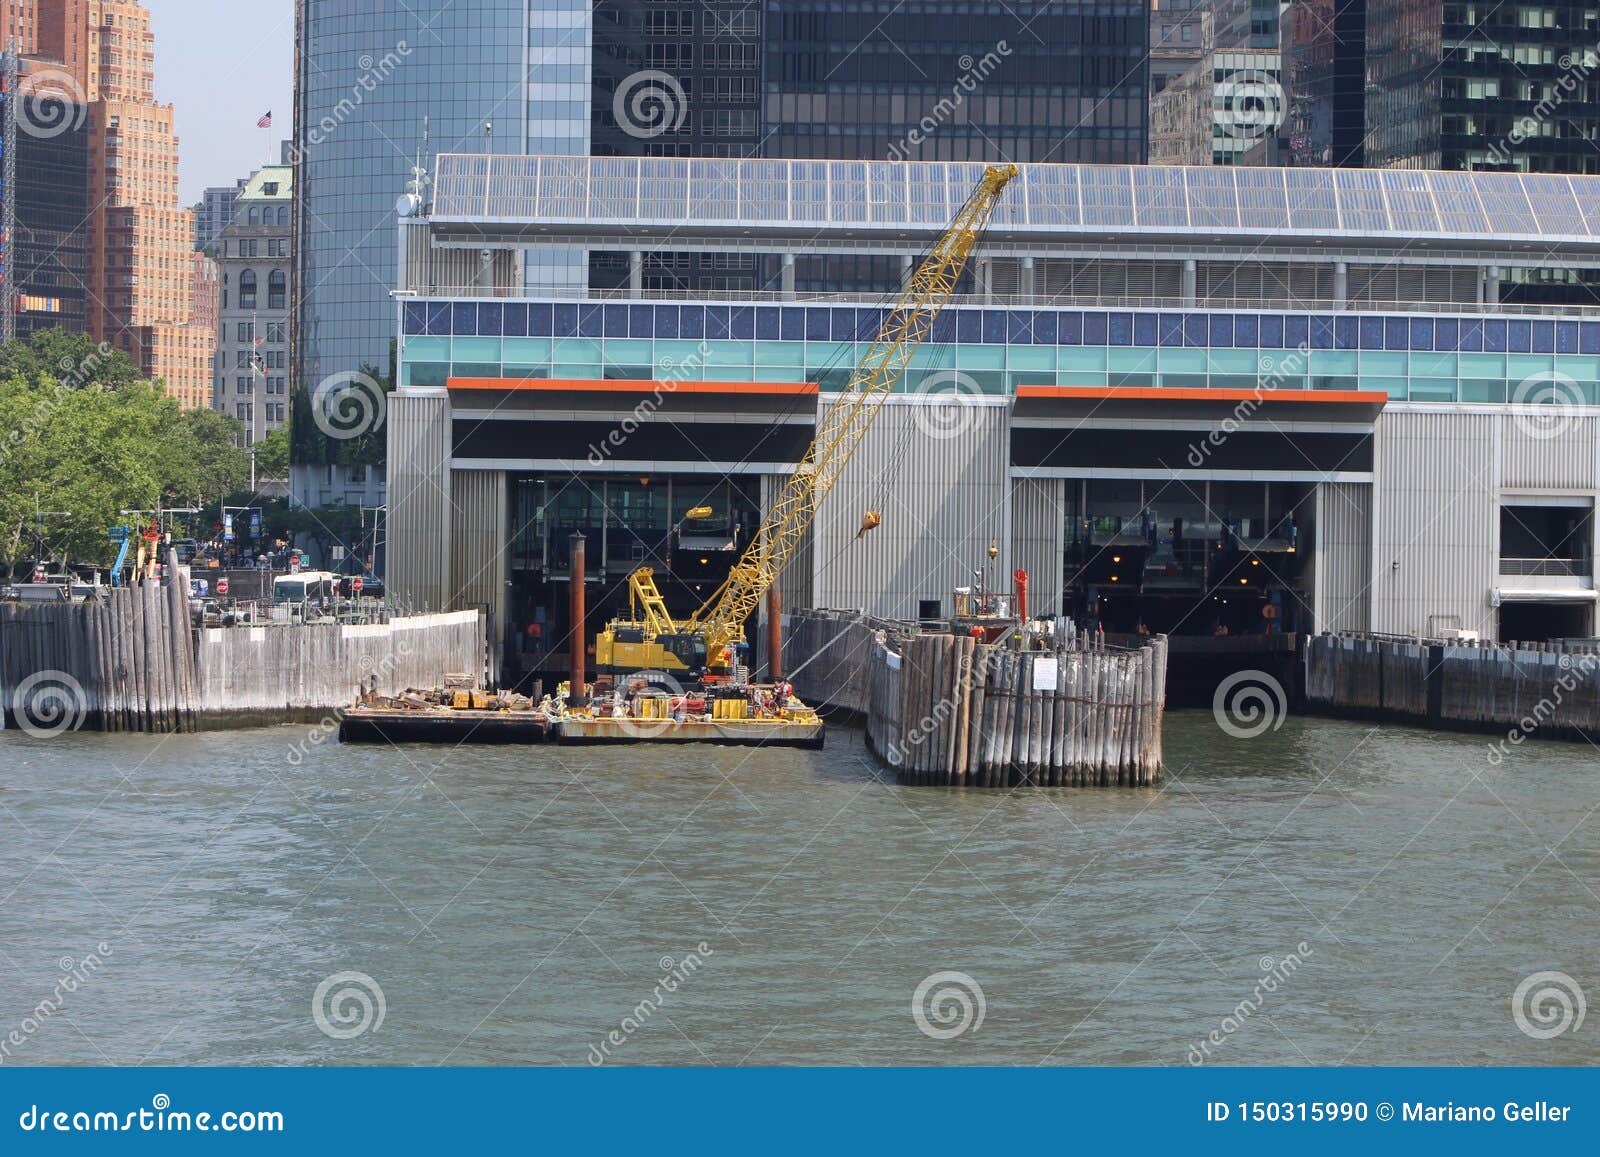 pier of the saten island ferry new york from hudson river